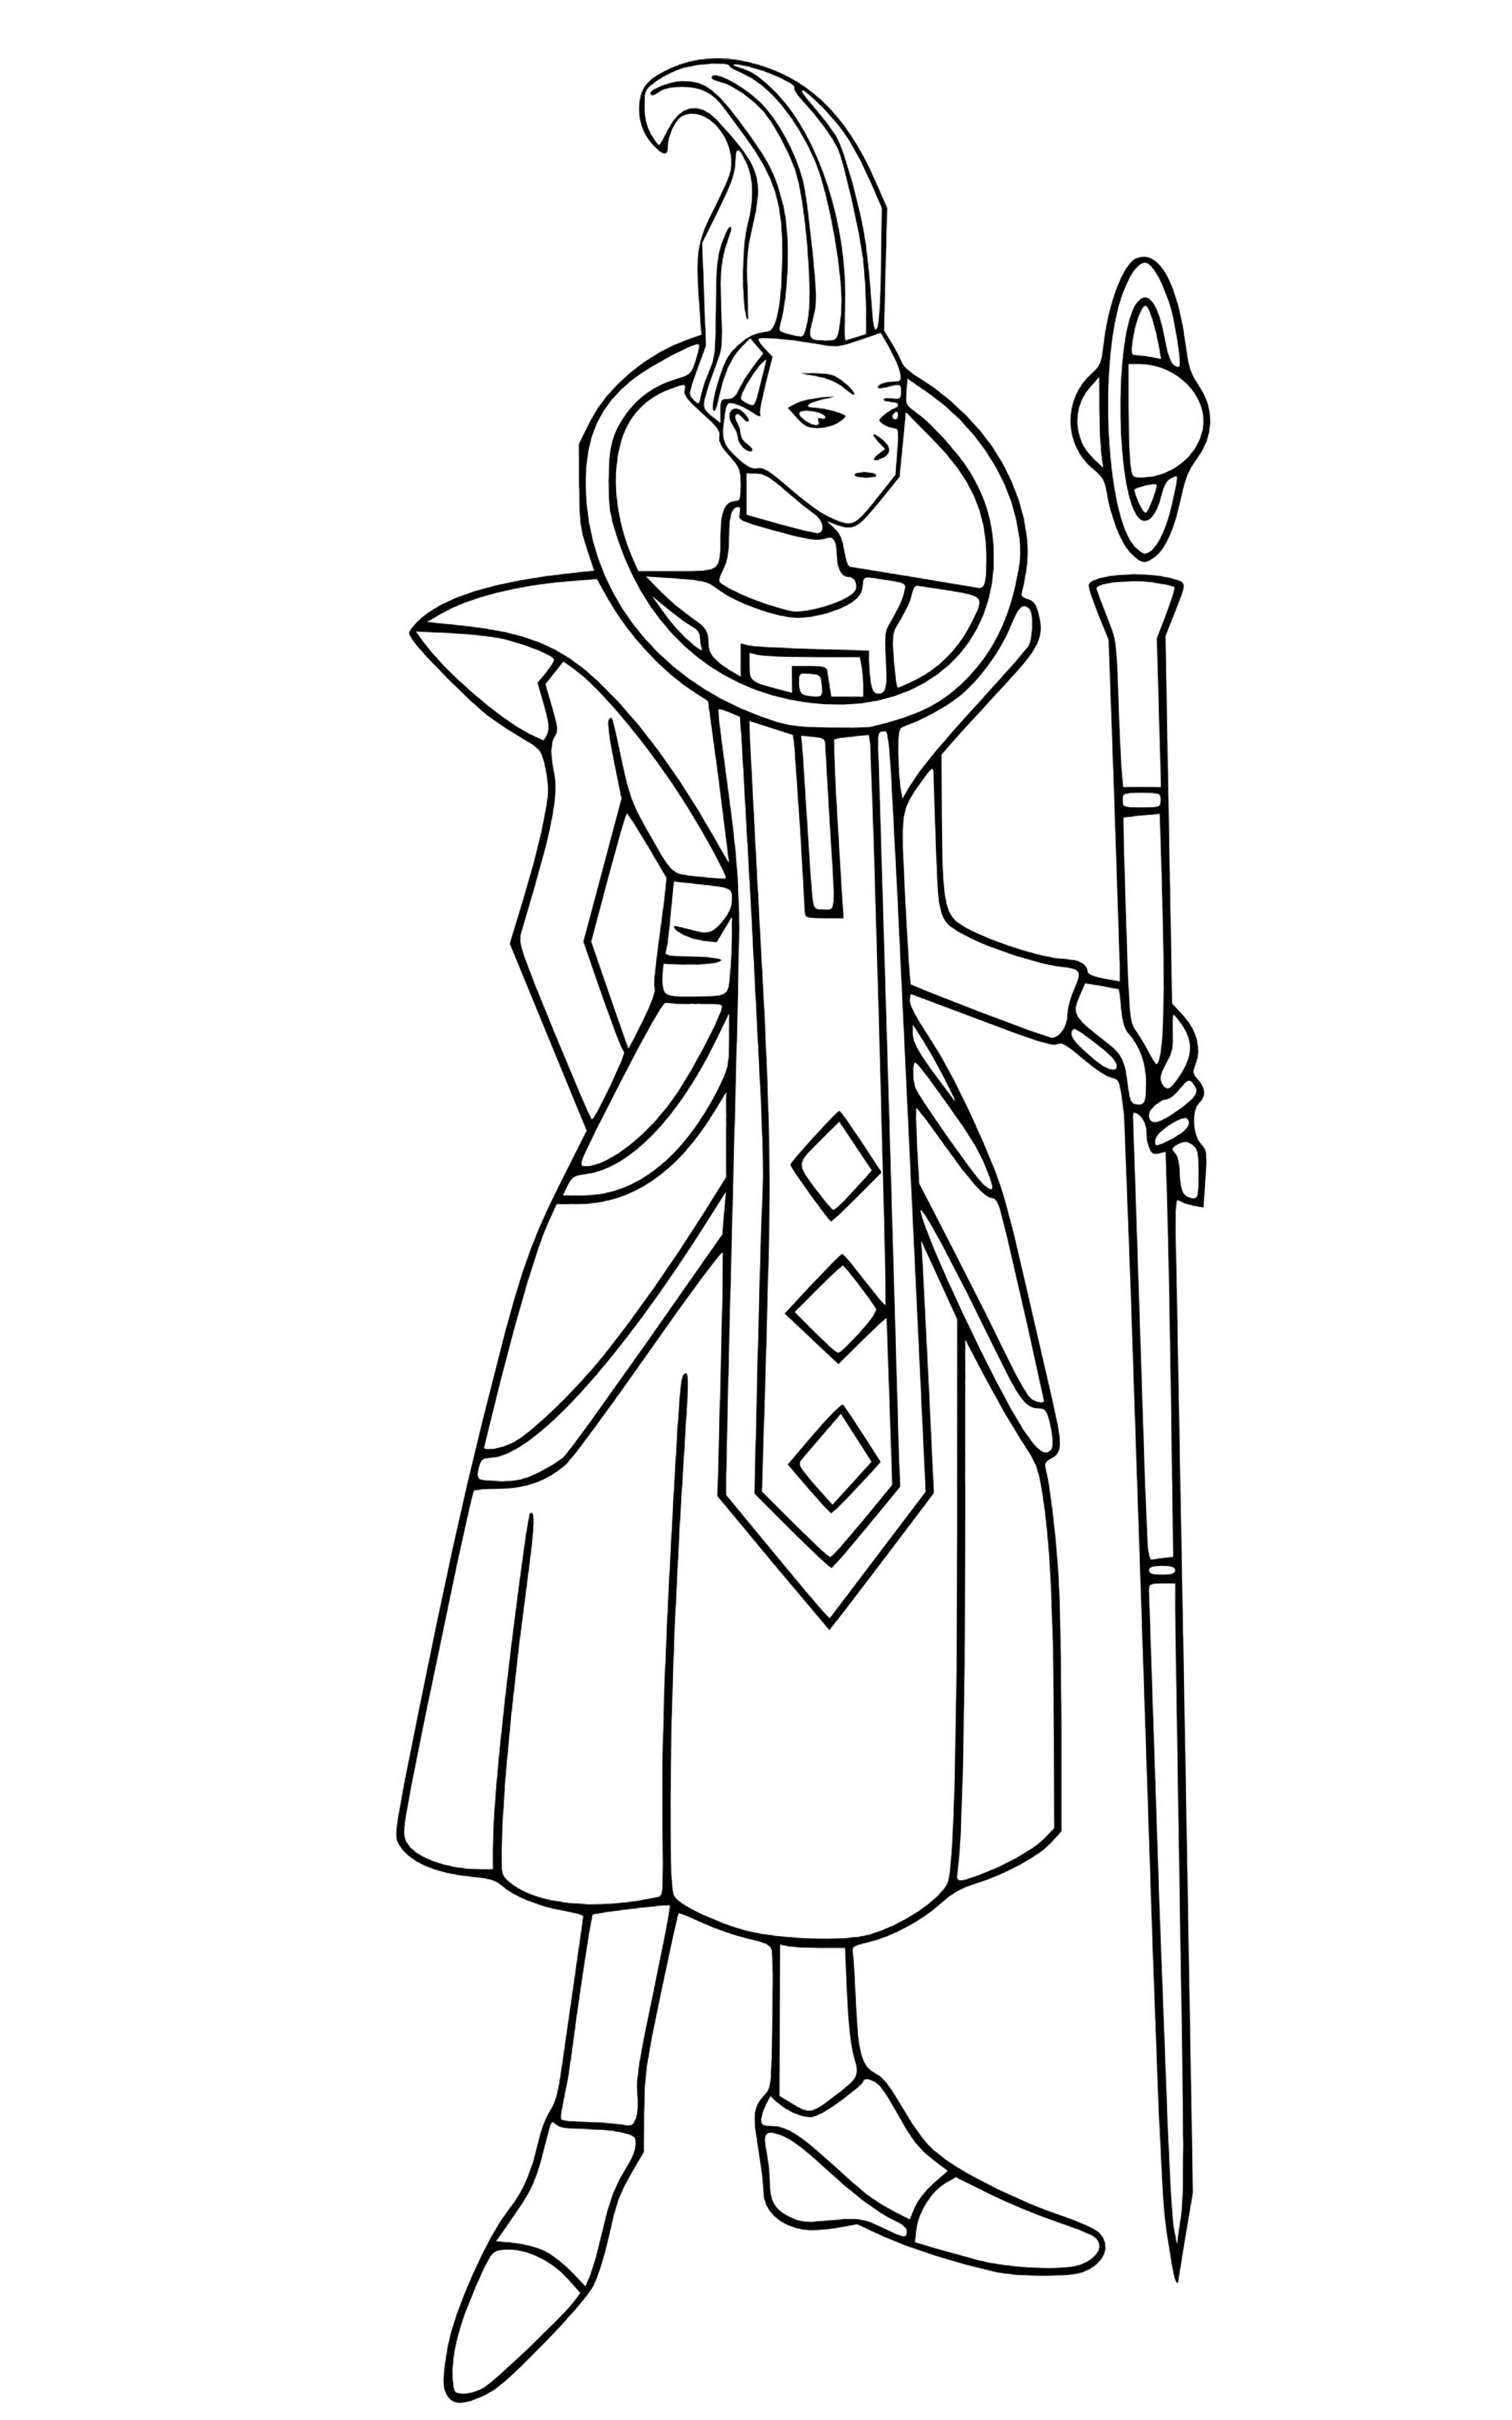 Dragon Ball Super coloring page with few details for kids : Whis